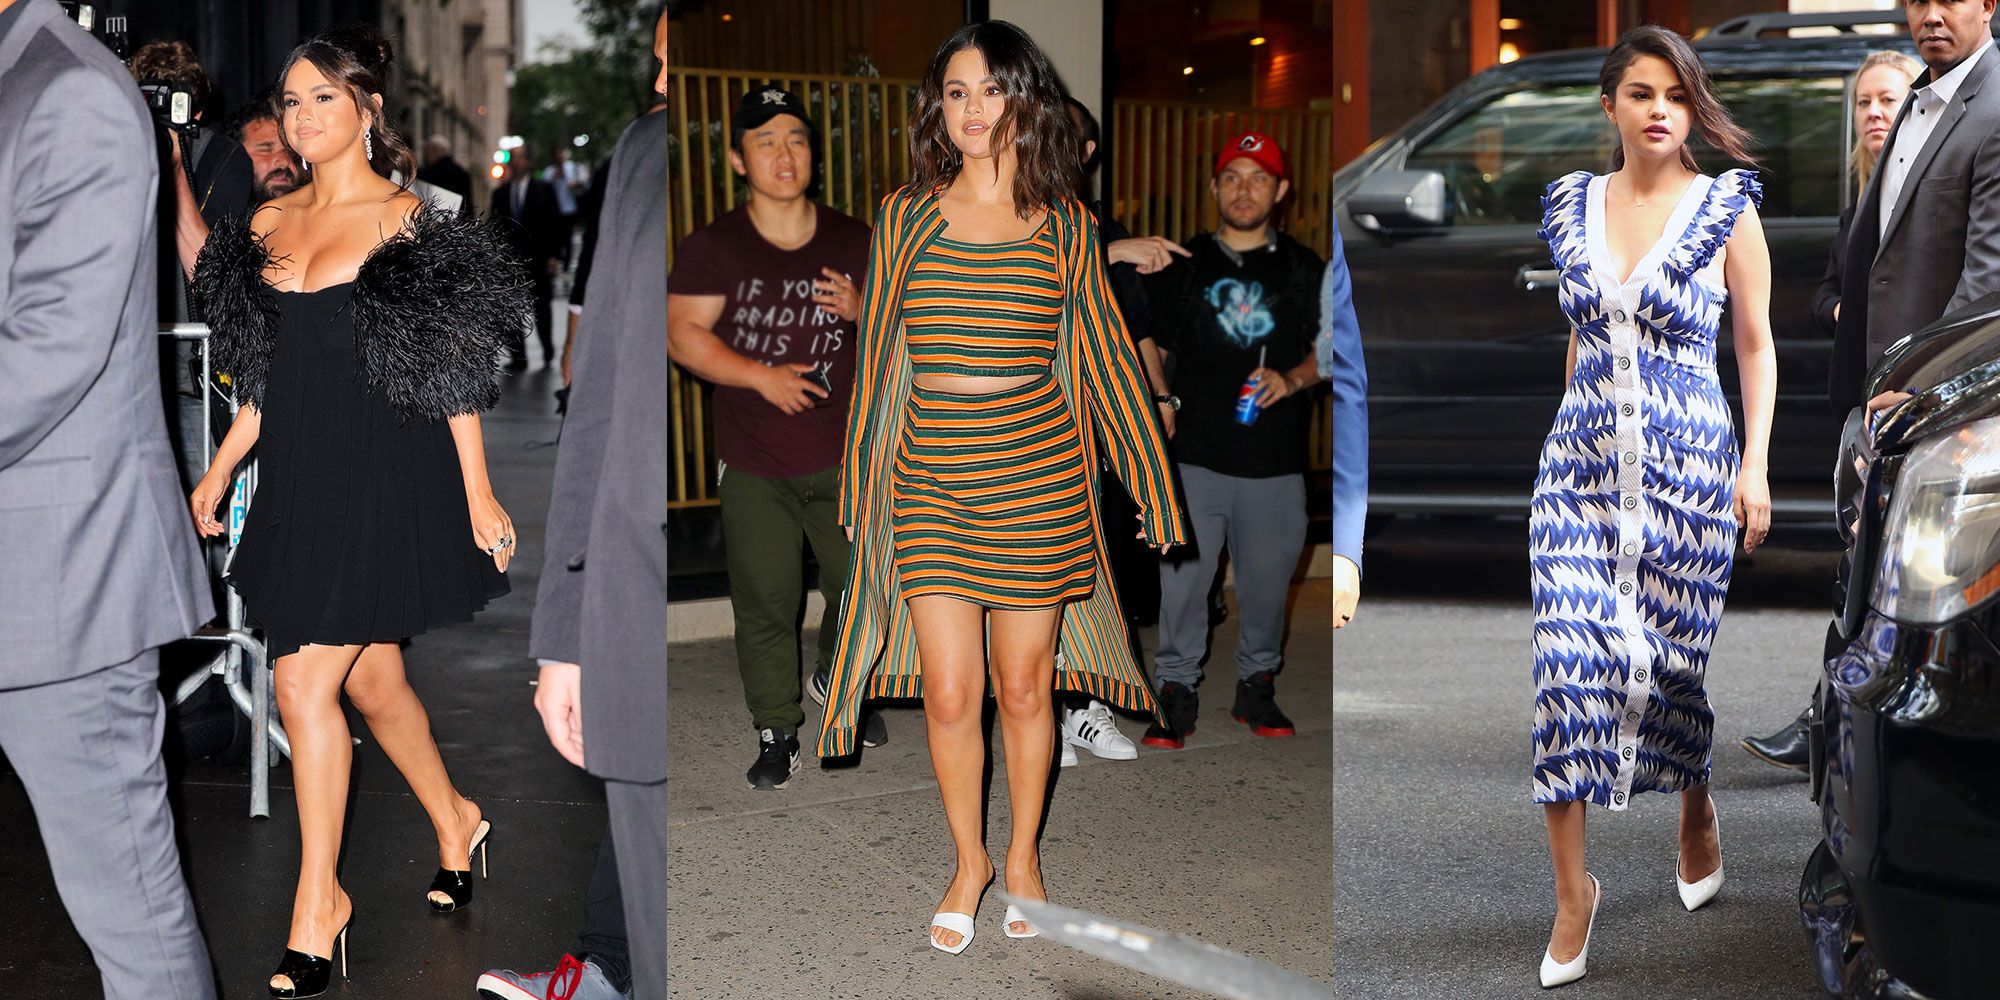 Selena Gomez Wore 6 Outfits in 1 Day — But She Loved Her Date